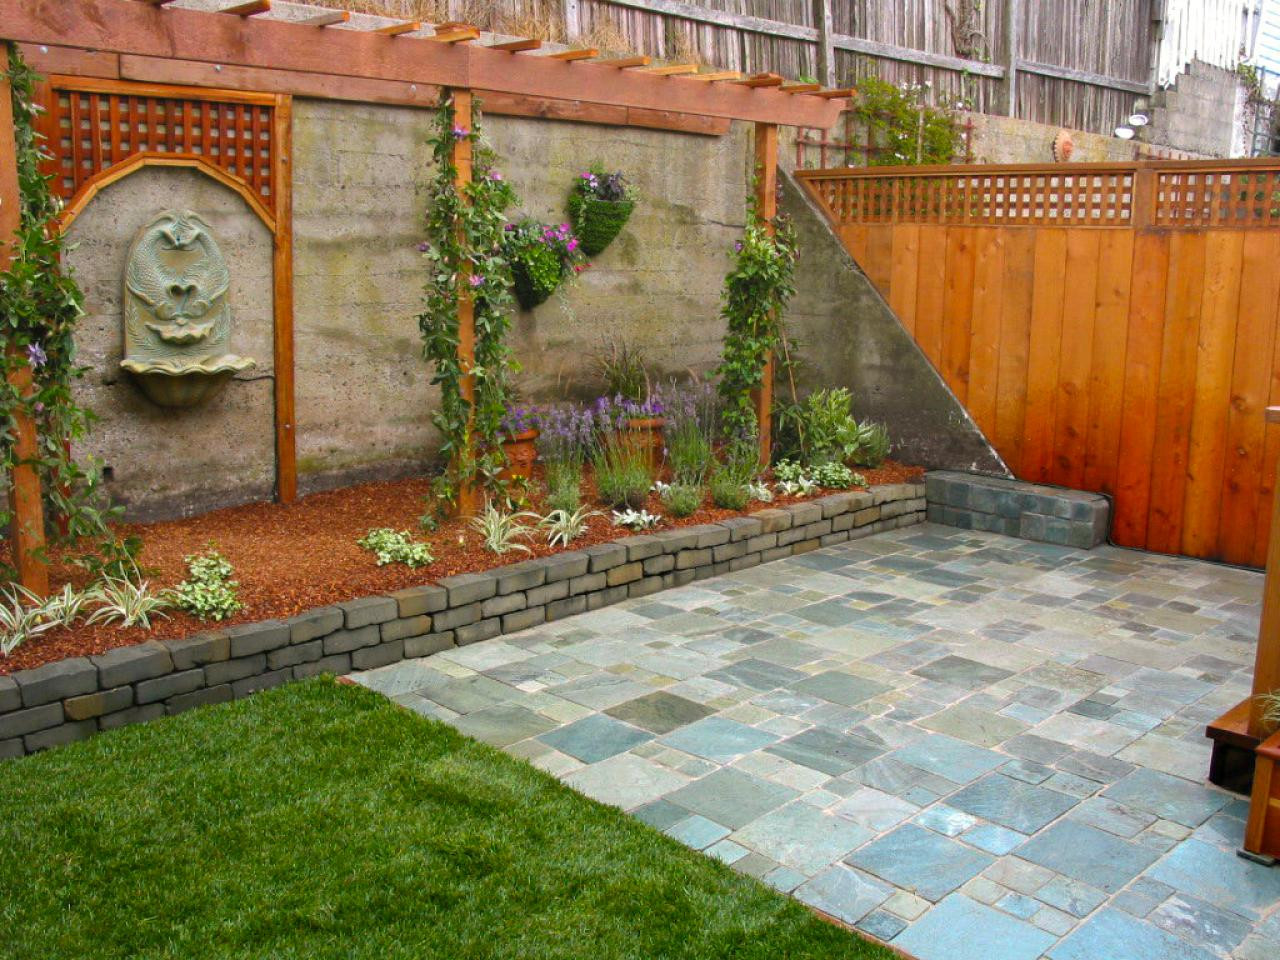 Backyard Fence Decoration Ideas
 Inspiring Concrete Tiled Flooring At Patio Decorated With